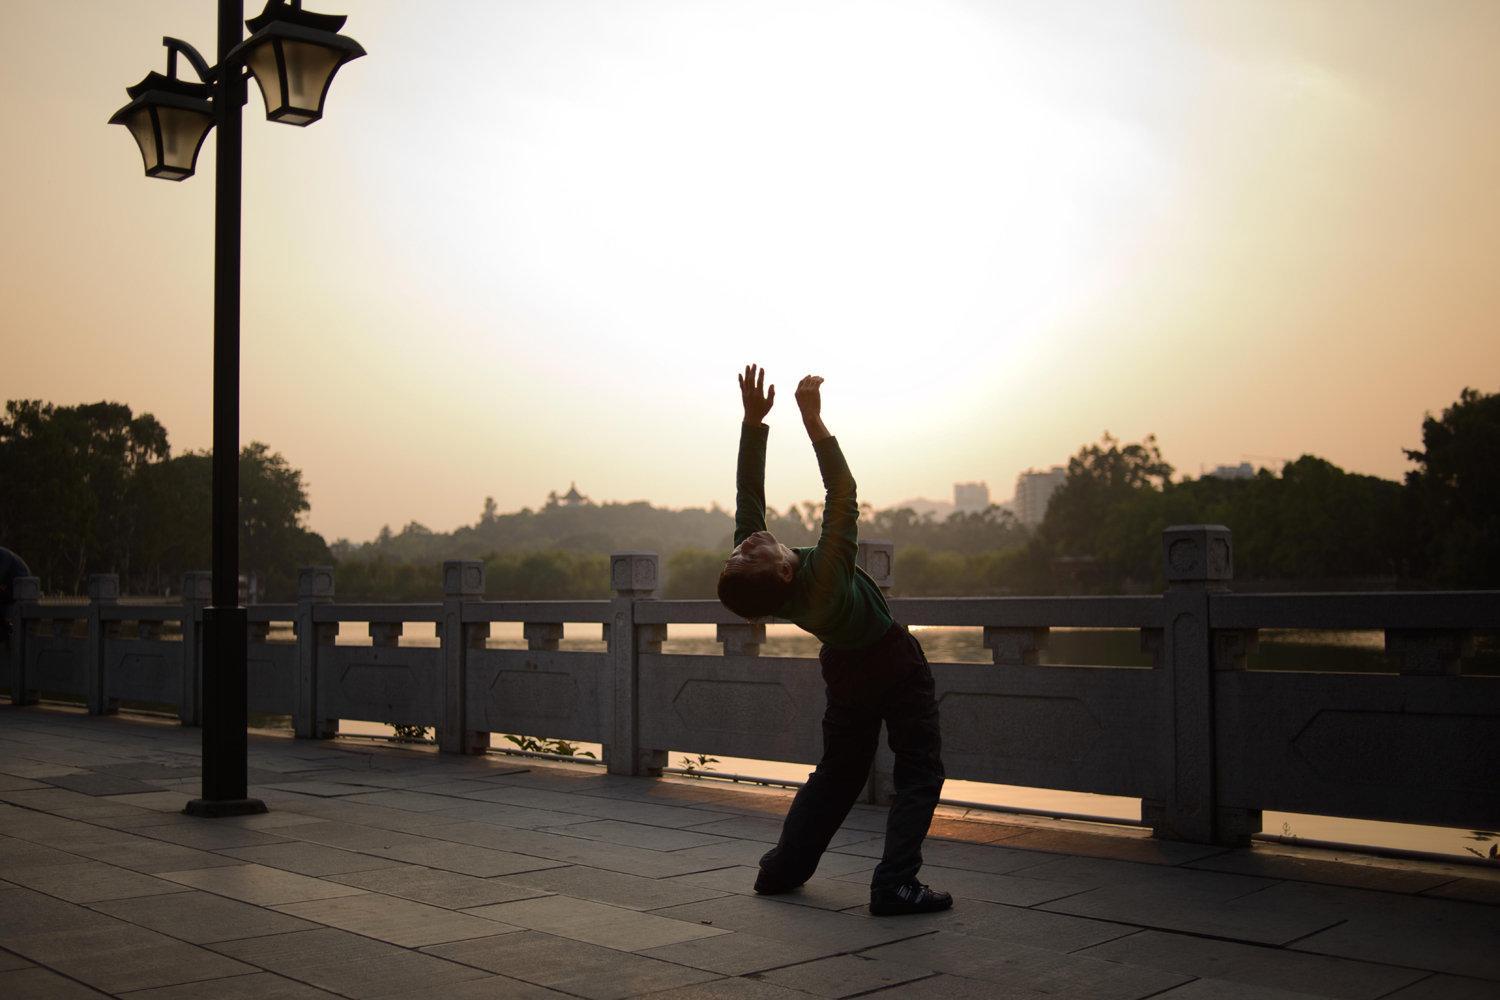 Oct. 22, 2013. A man exercises in a park in Fuzhou, the capital of China's south-eastern Fujian province.